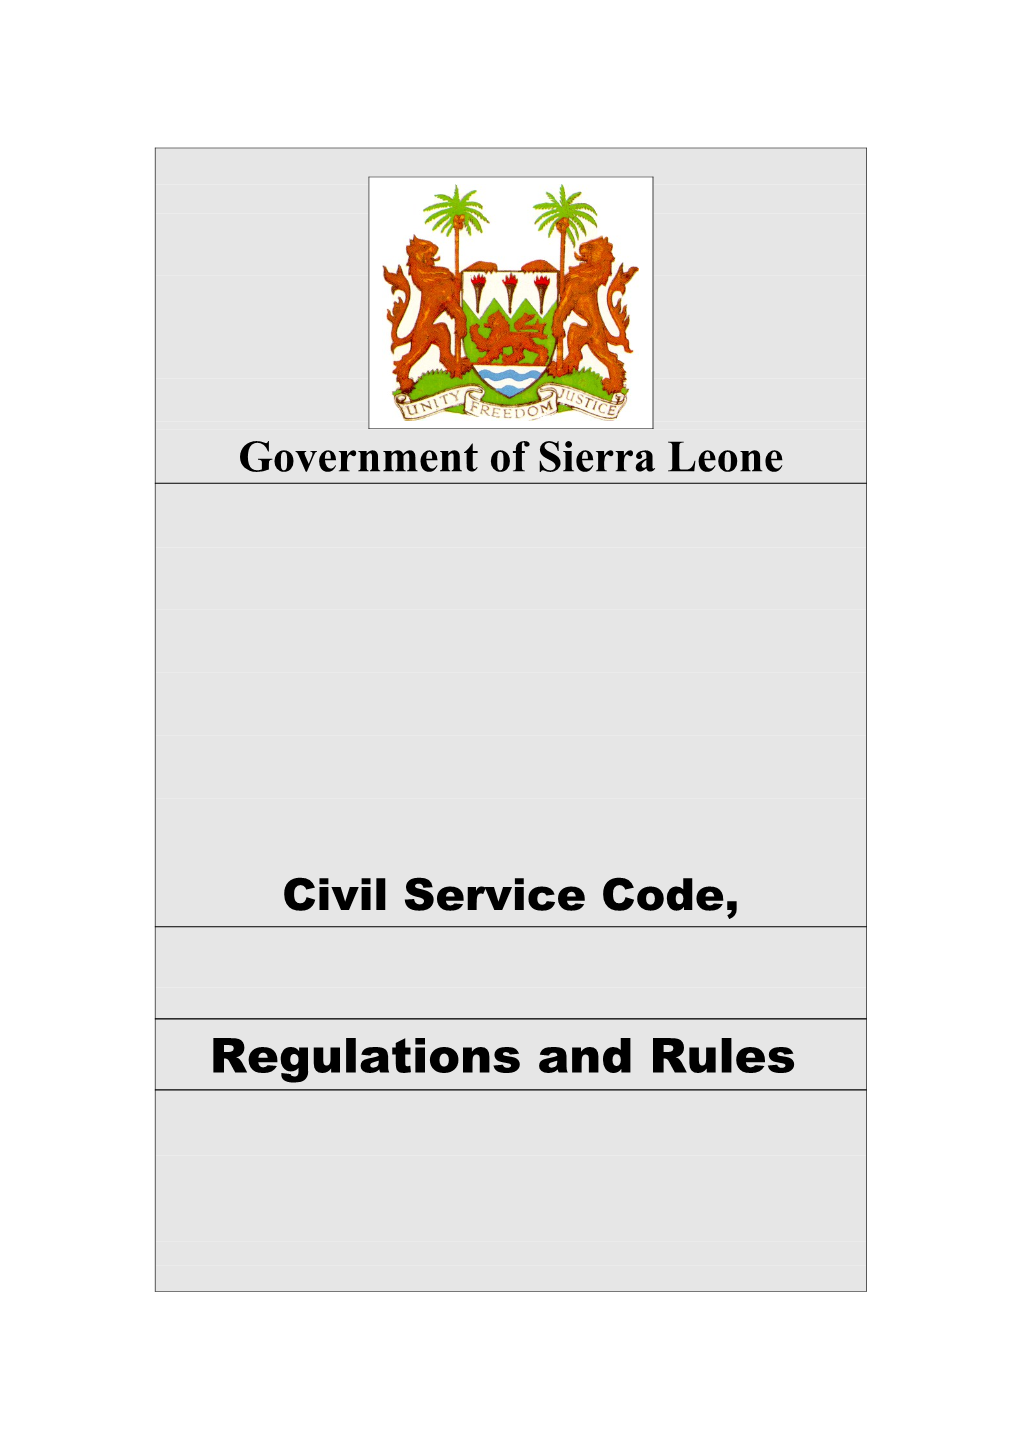 Civil Service Code, Regulations and Rules/Administrative Manual